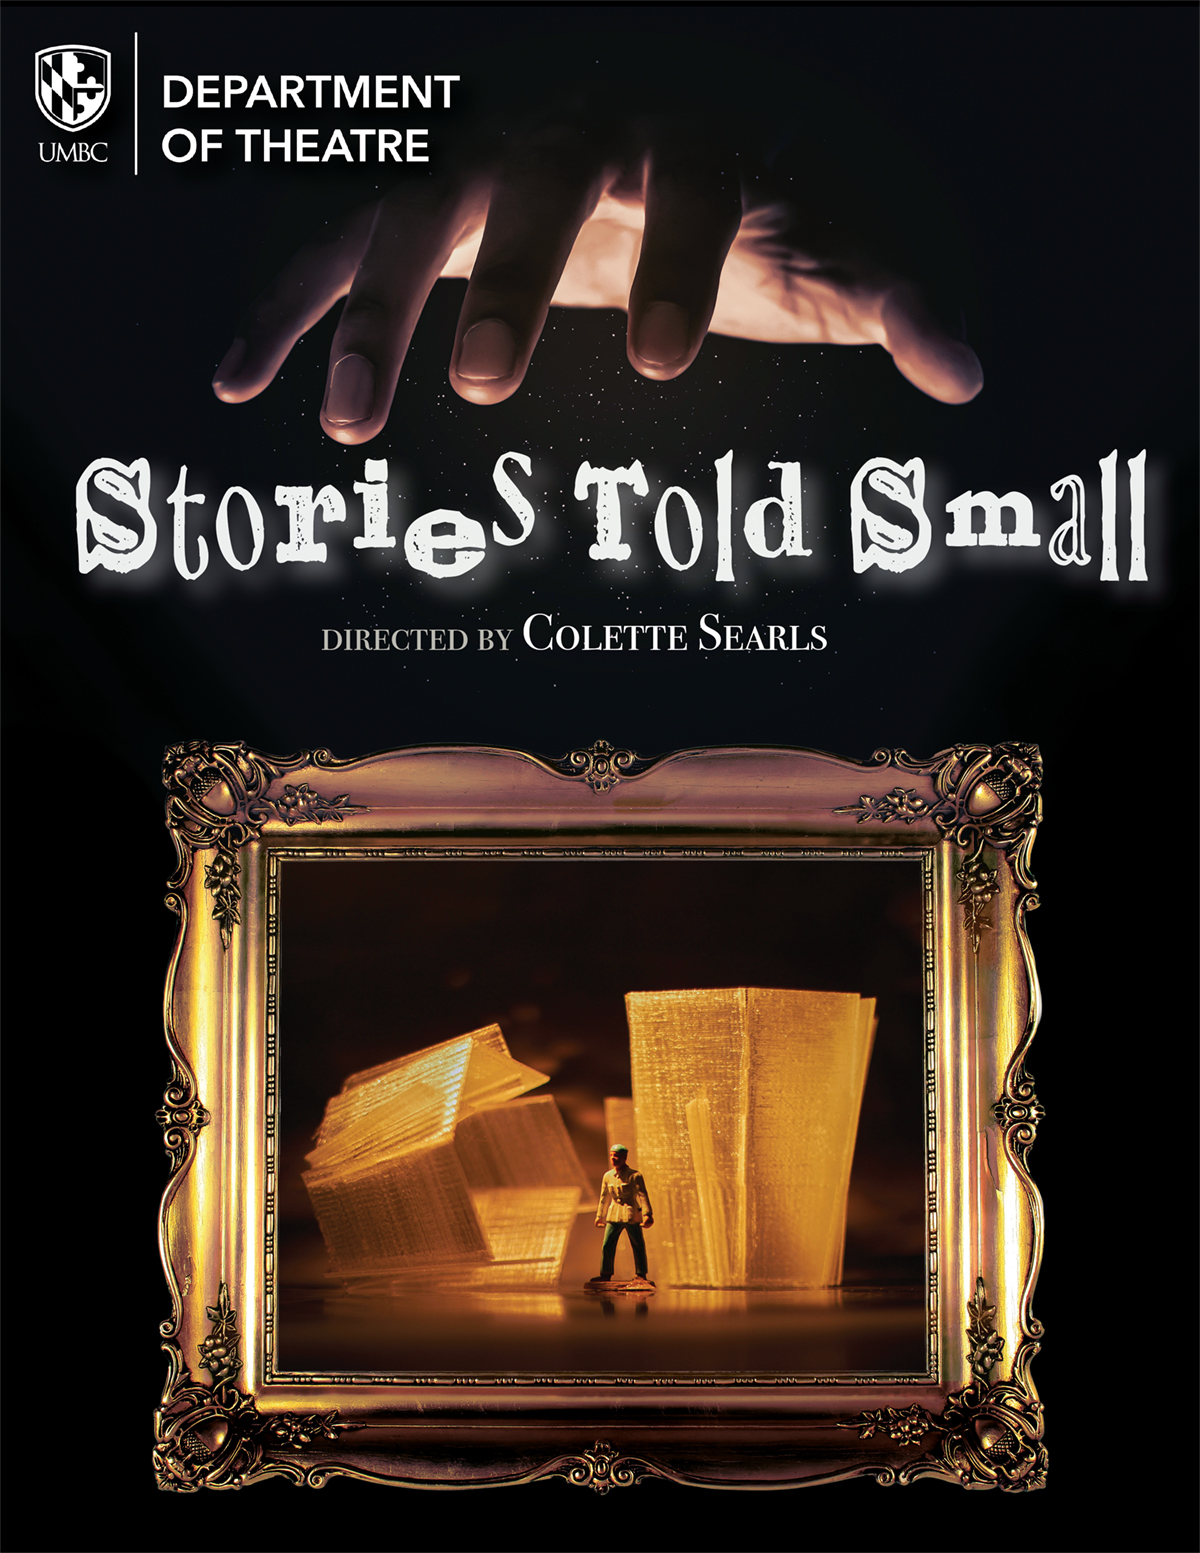 In a photo montage, a hand reaches down, as if to touch a picture frame below it. Within the frame, we see a human figure surrounded by abstract buildings. Text says UMBC Department of Theatre, Stories told Small, Directed by Colette Searls